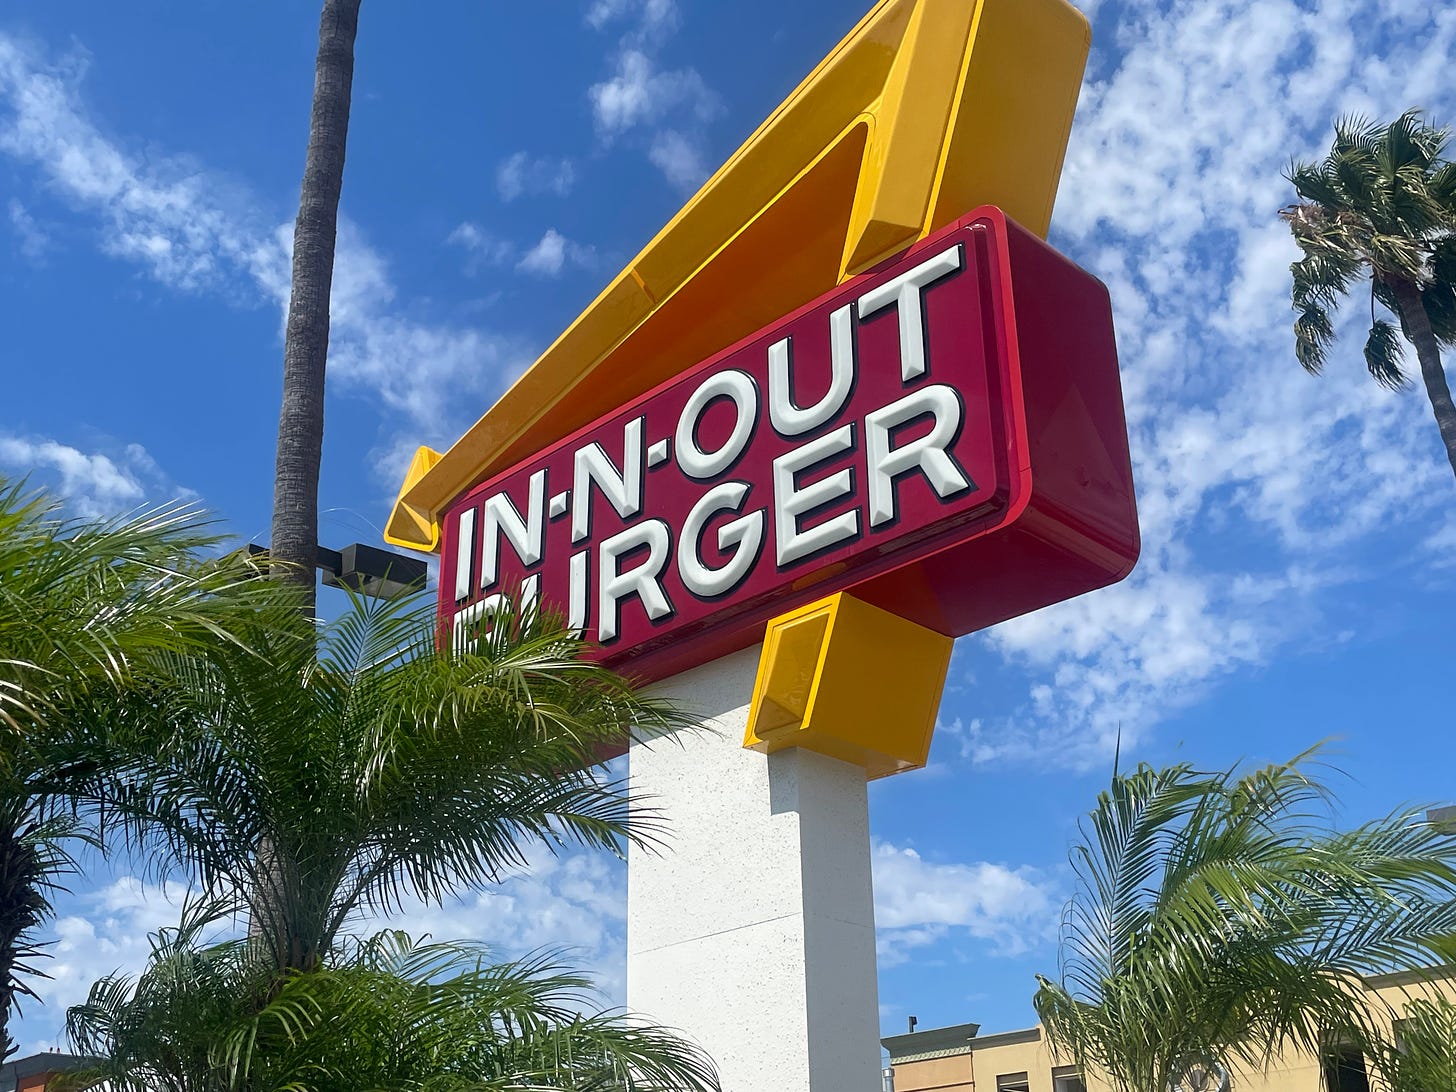 The In-N-Out Burger sign at LAX.